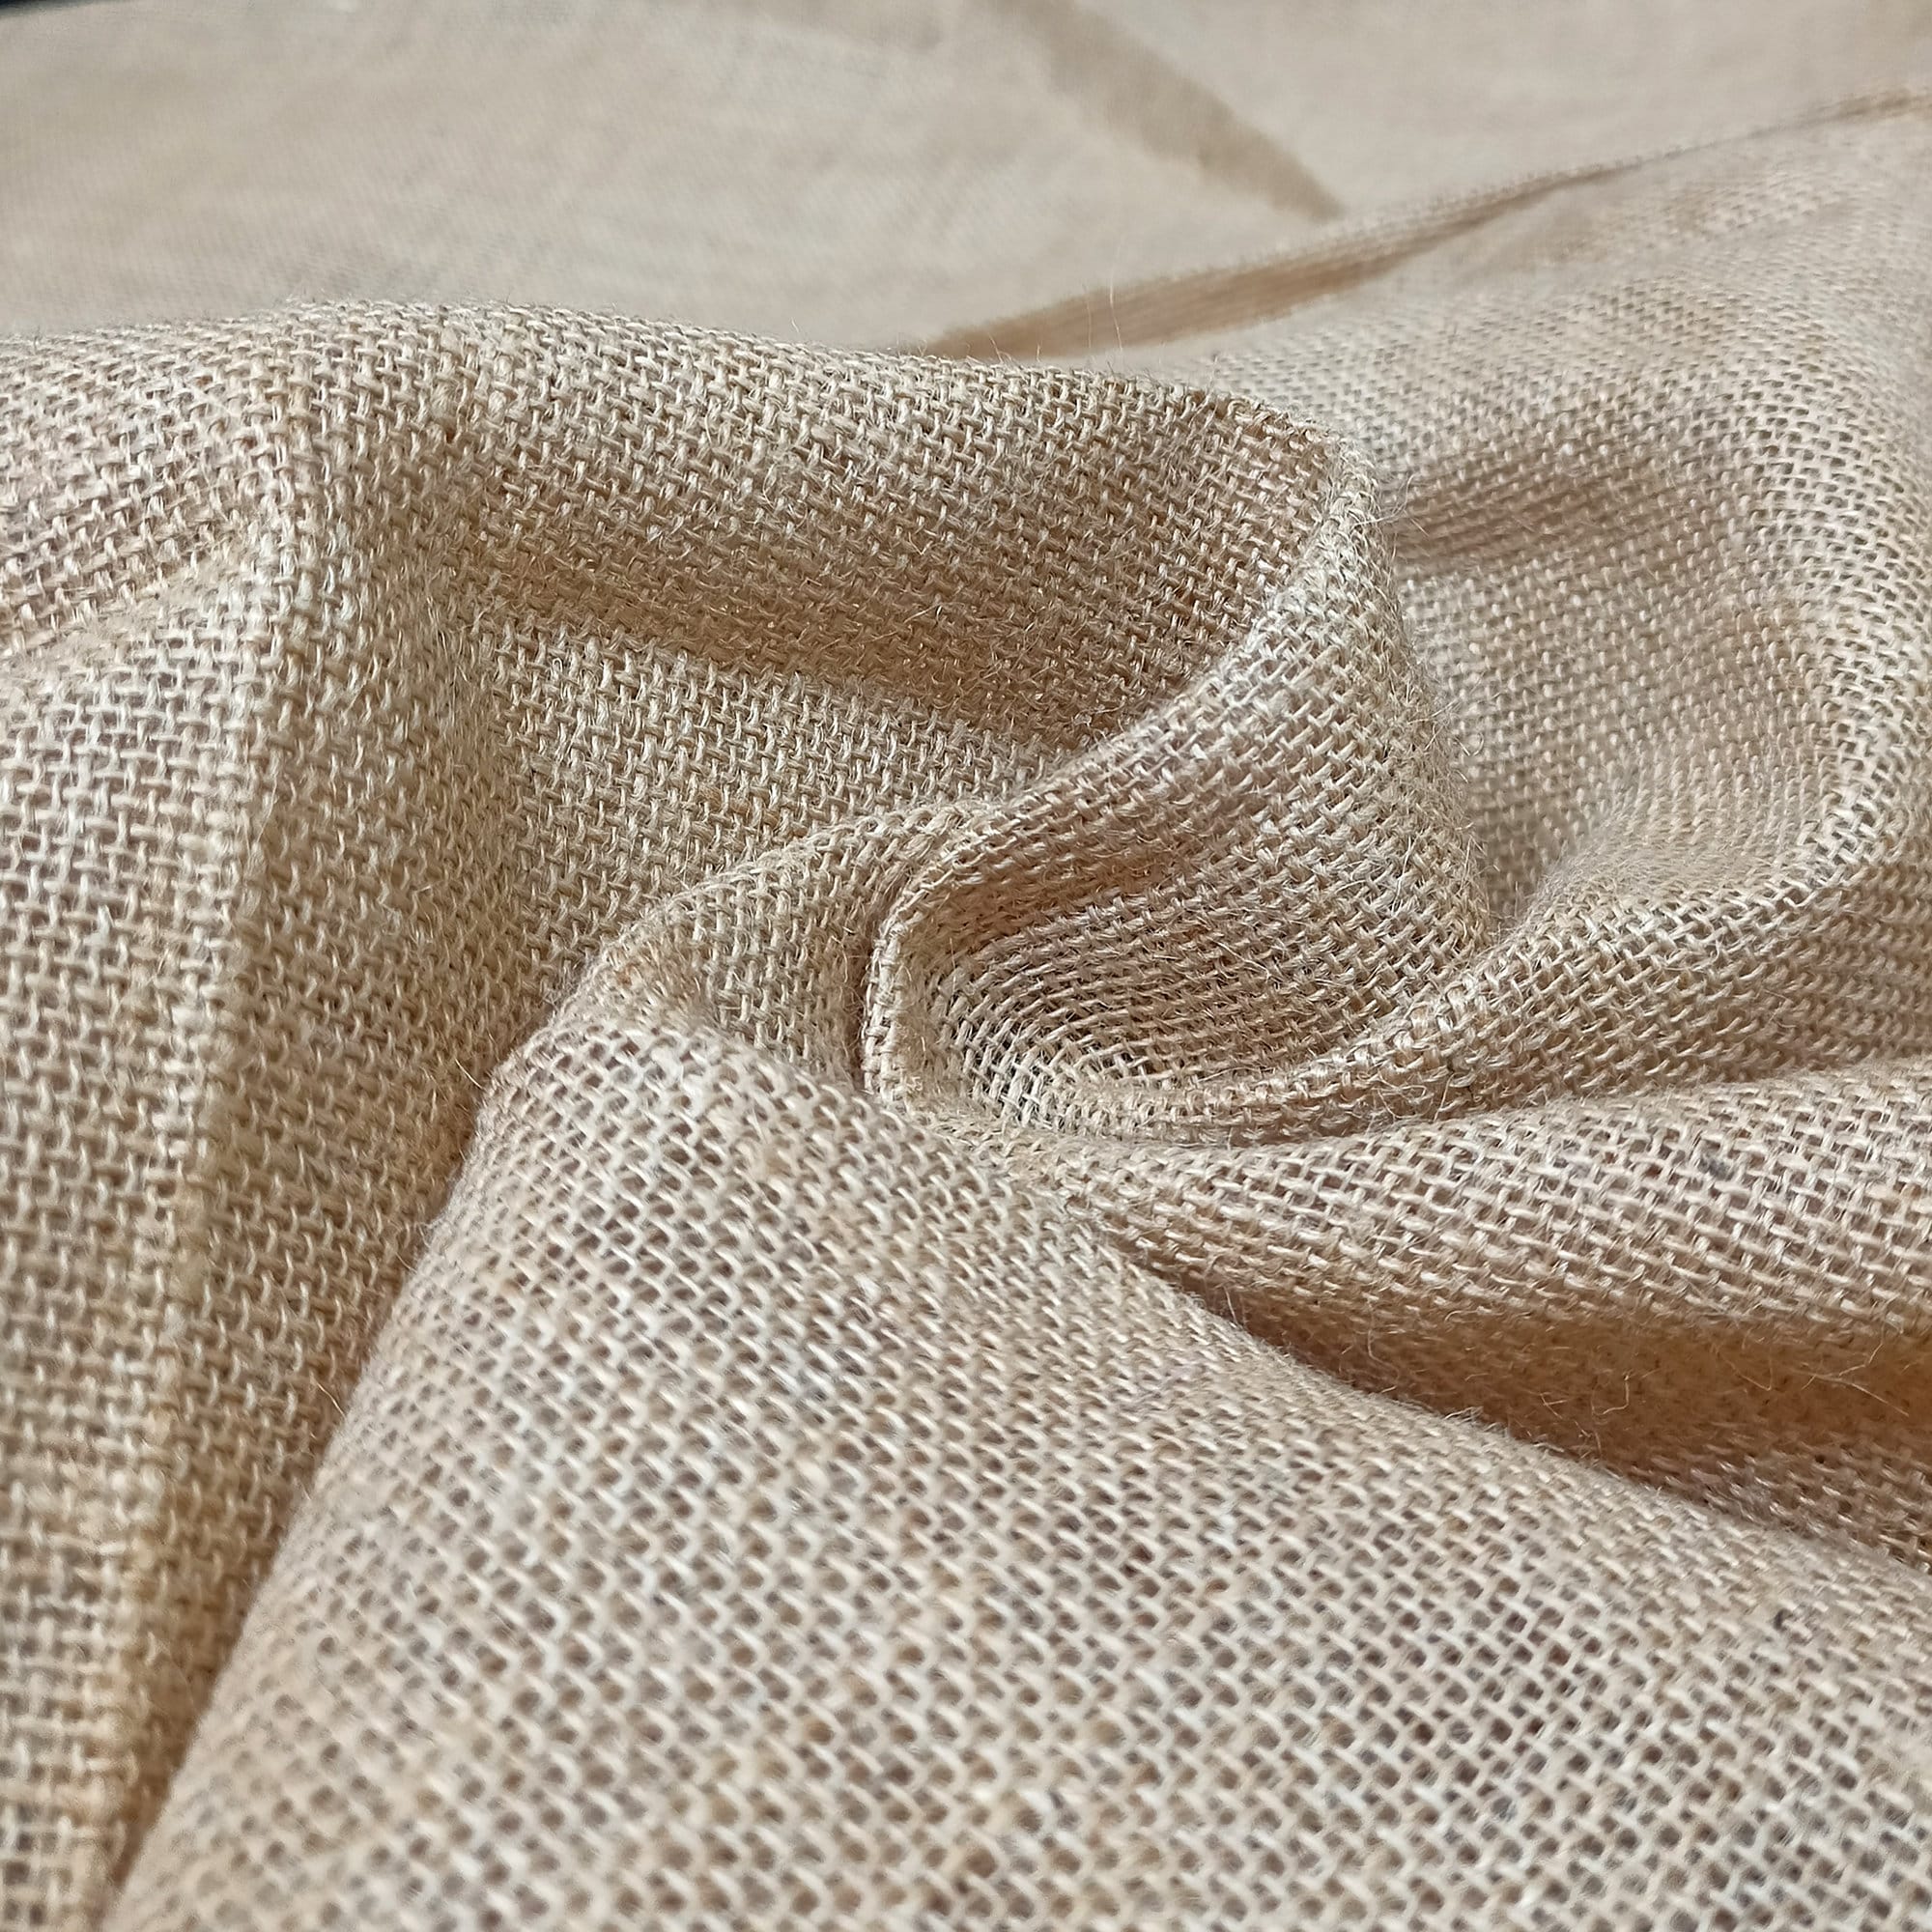 1m wide Jute Hessian Burlap Fabric Wedding Crafts Upholstery Sacking Top  Quality